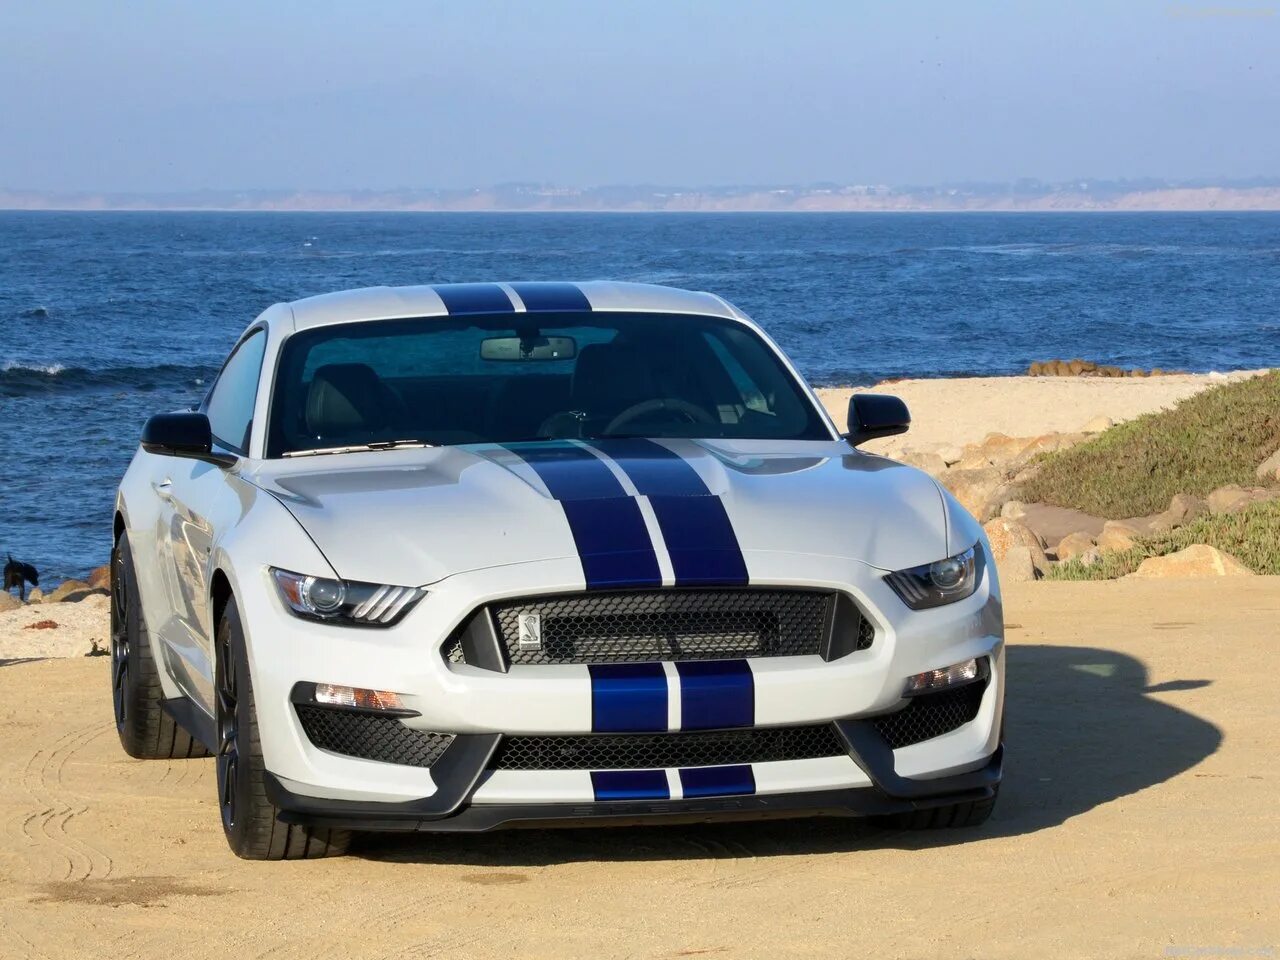 Mustang shelby gt. Форд Мустанг Шелби gt 350. Форд Мустанг Shelby gt350. Форд Мустанг Шелби 2015. Ford Mustang Shelby gt350 2015.